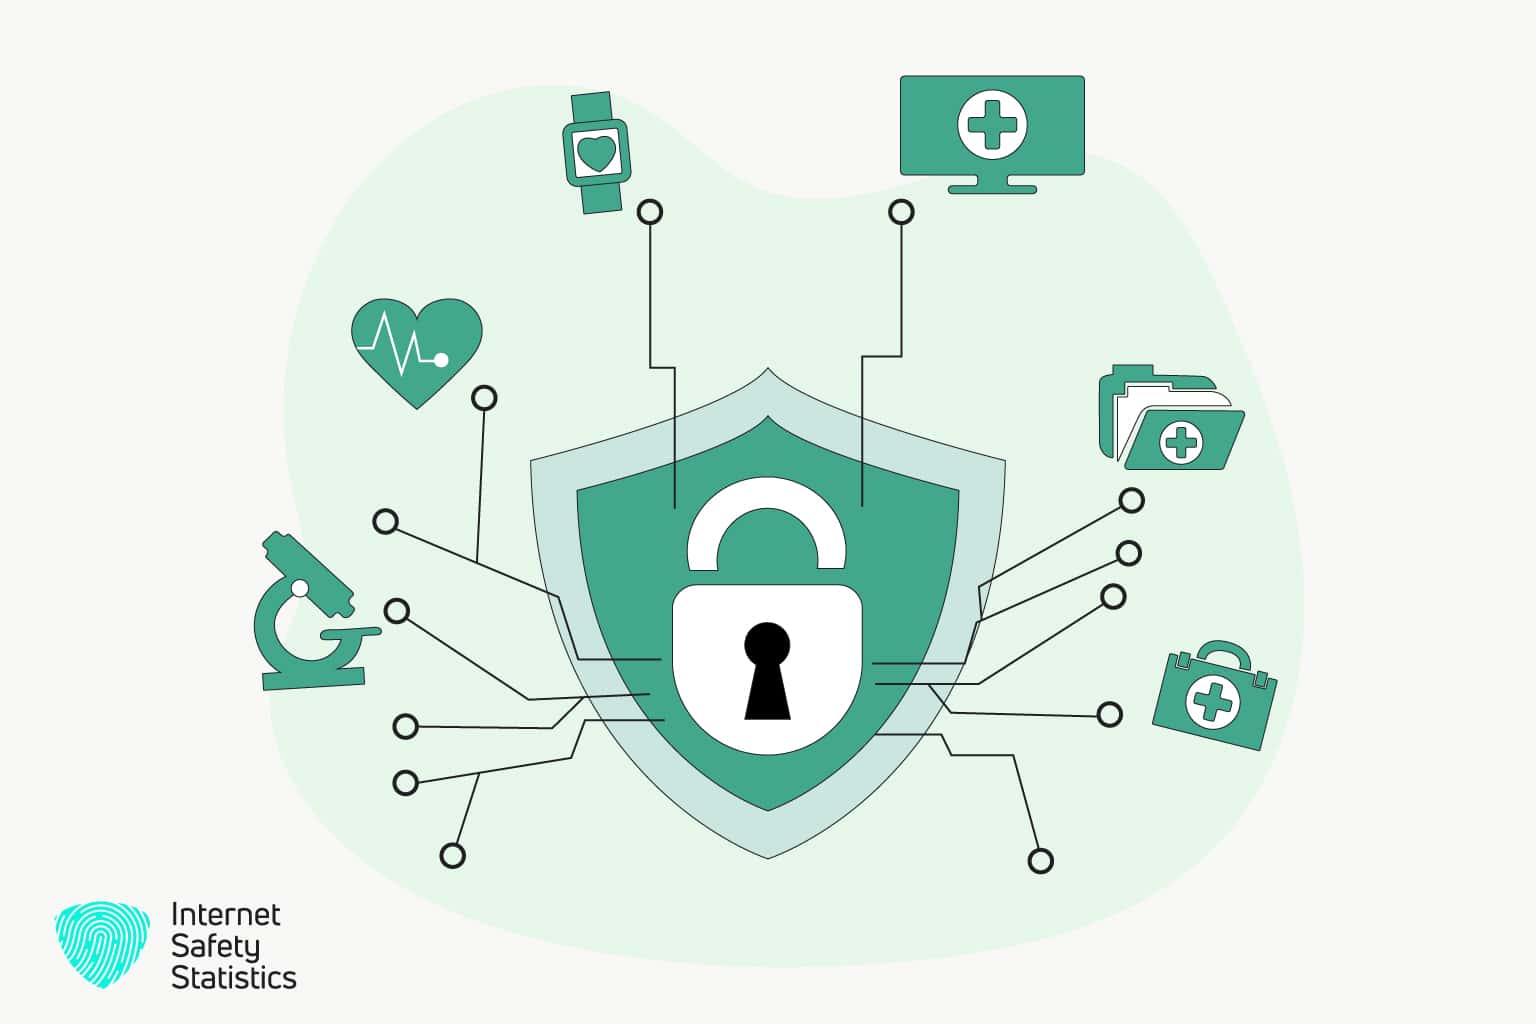 healthcare system, cybersecurity in the healthcare system